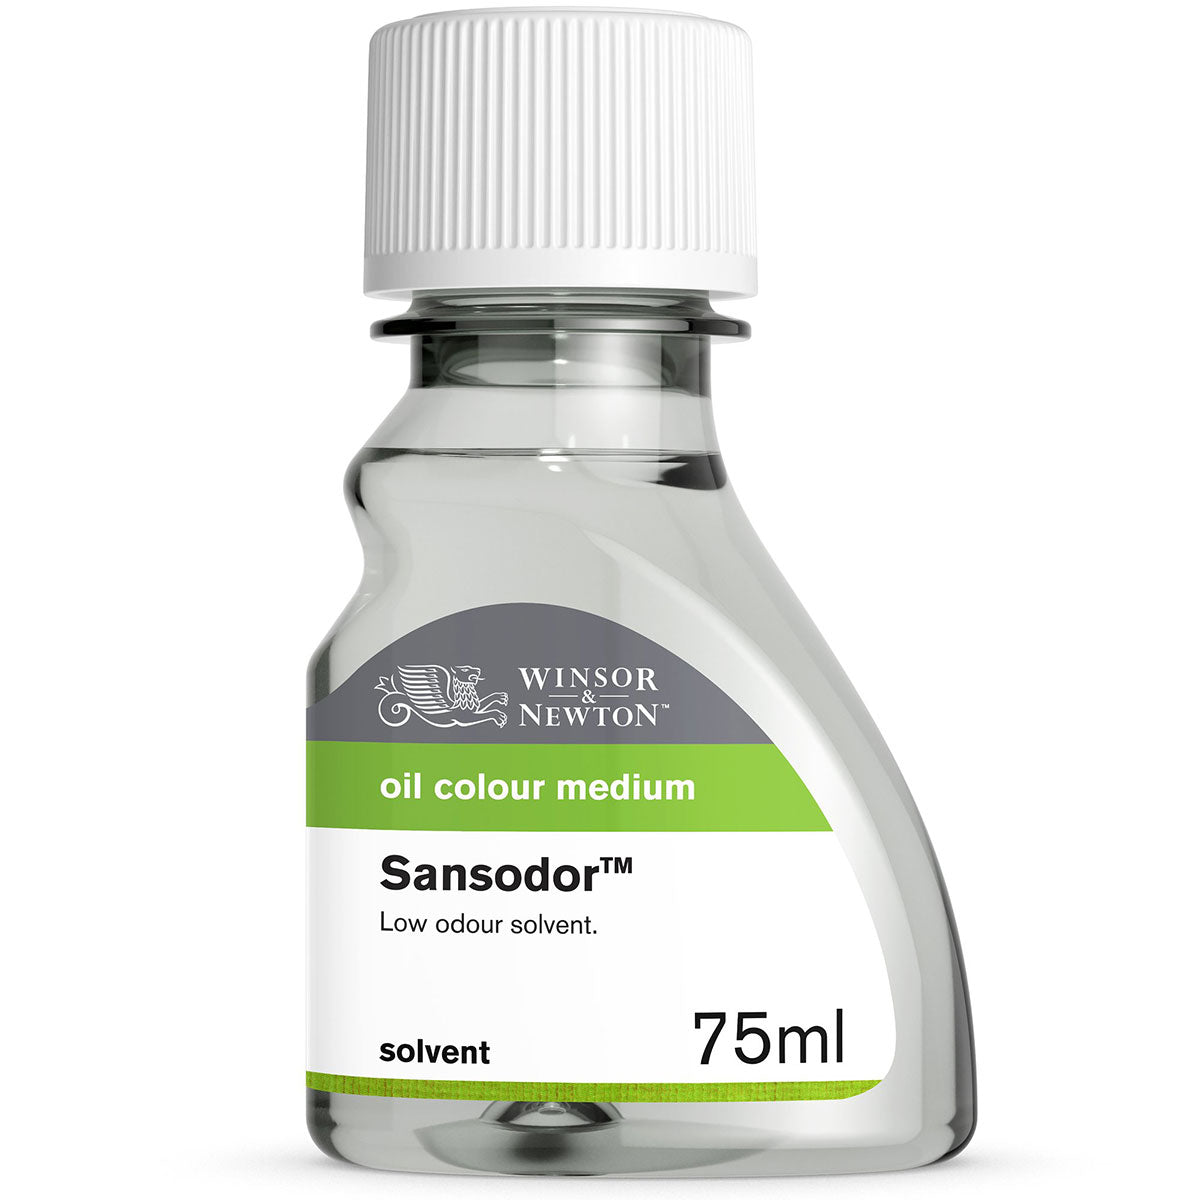 Winsor and Newton - Sansodor Low Odour Solvent Cleaner - 75ml -